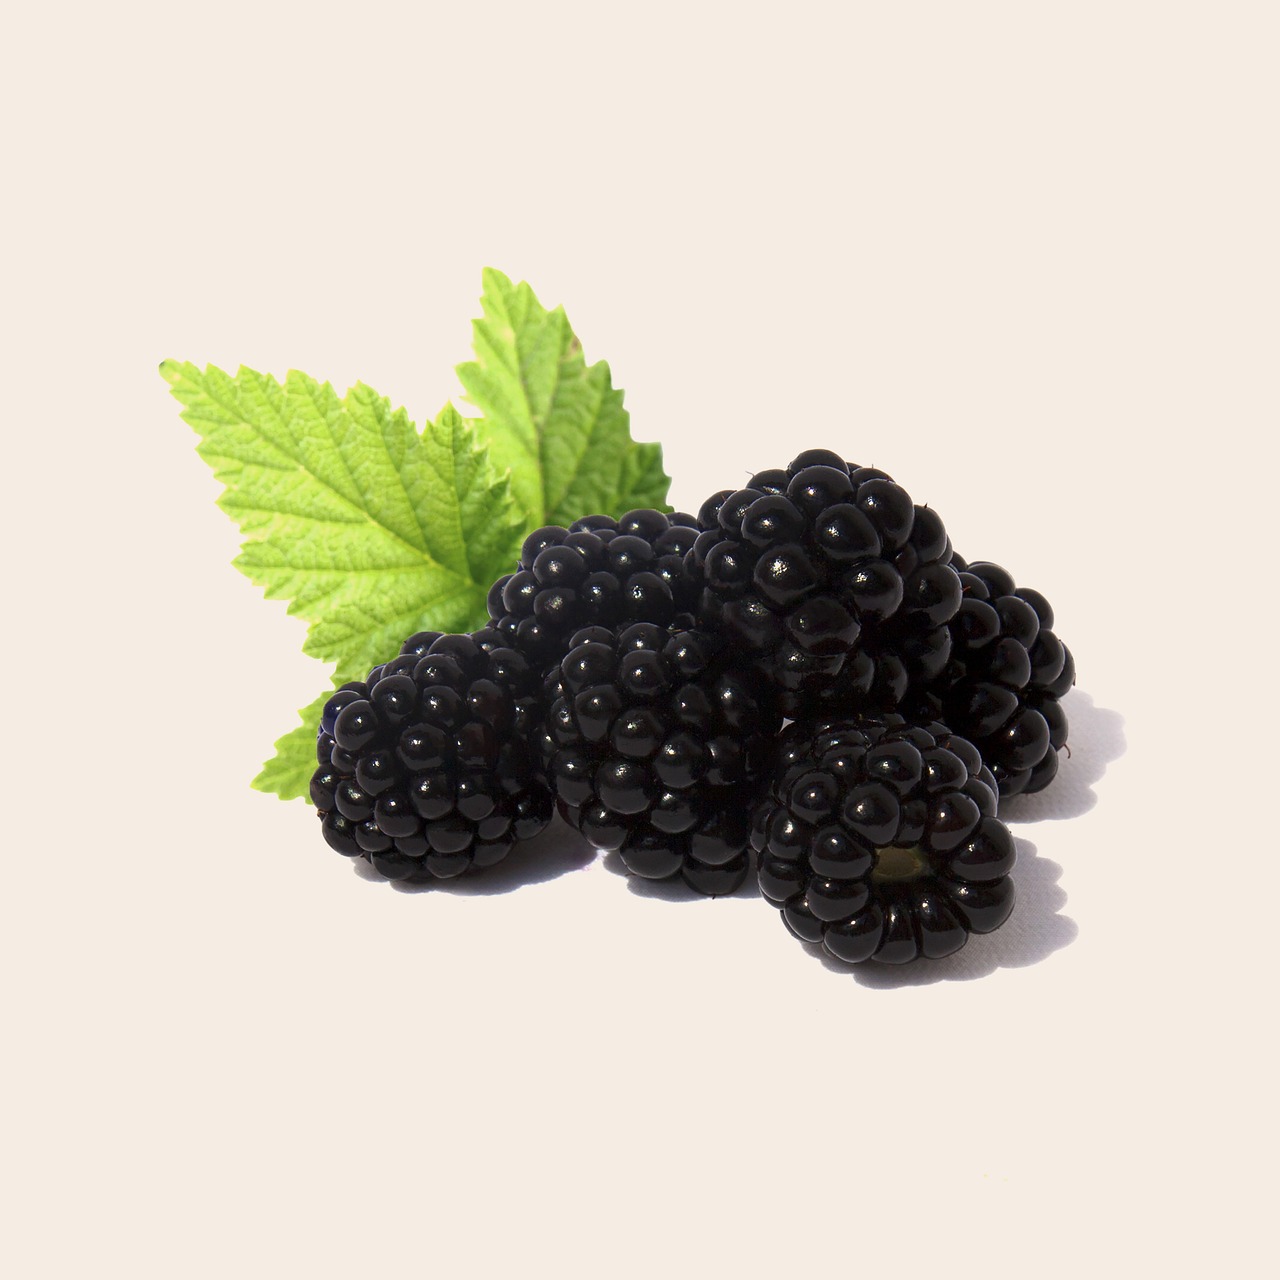 Benefits Of Black Fruits Black Fruits Benefits Black Fruits Ke Fayde Black Fruits Name Black Fruits And Vegetables Immunity Boost Fruits Health News Health Tips